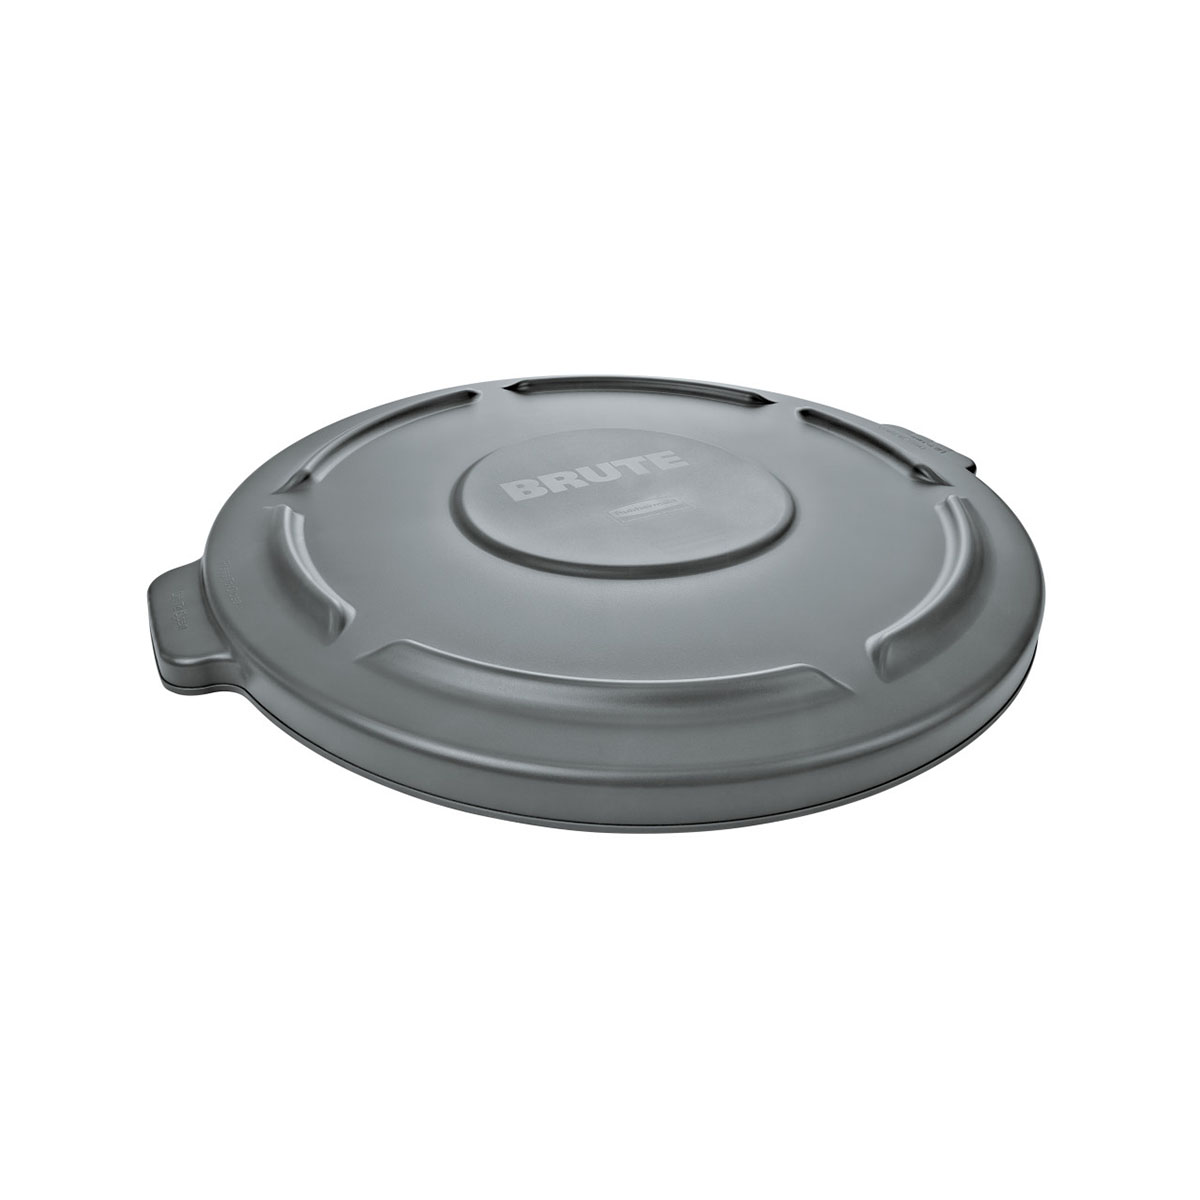 Rubbermaid FG263100 Lid (Only) for 32-Gallon Round Brute Container # 2632